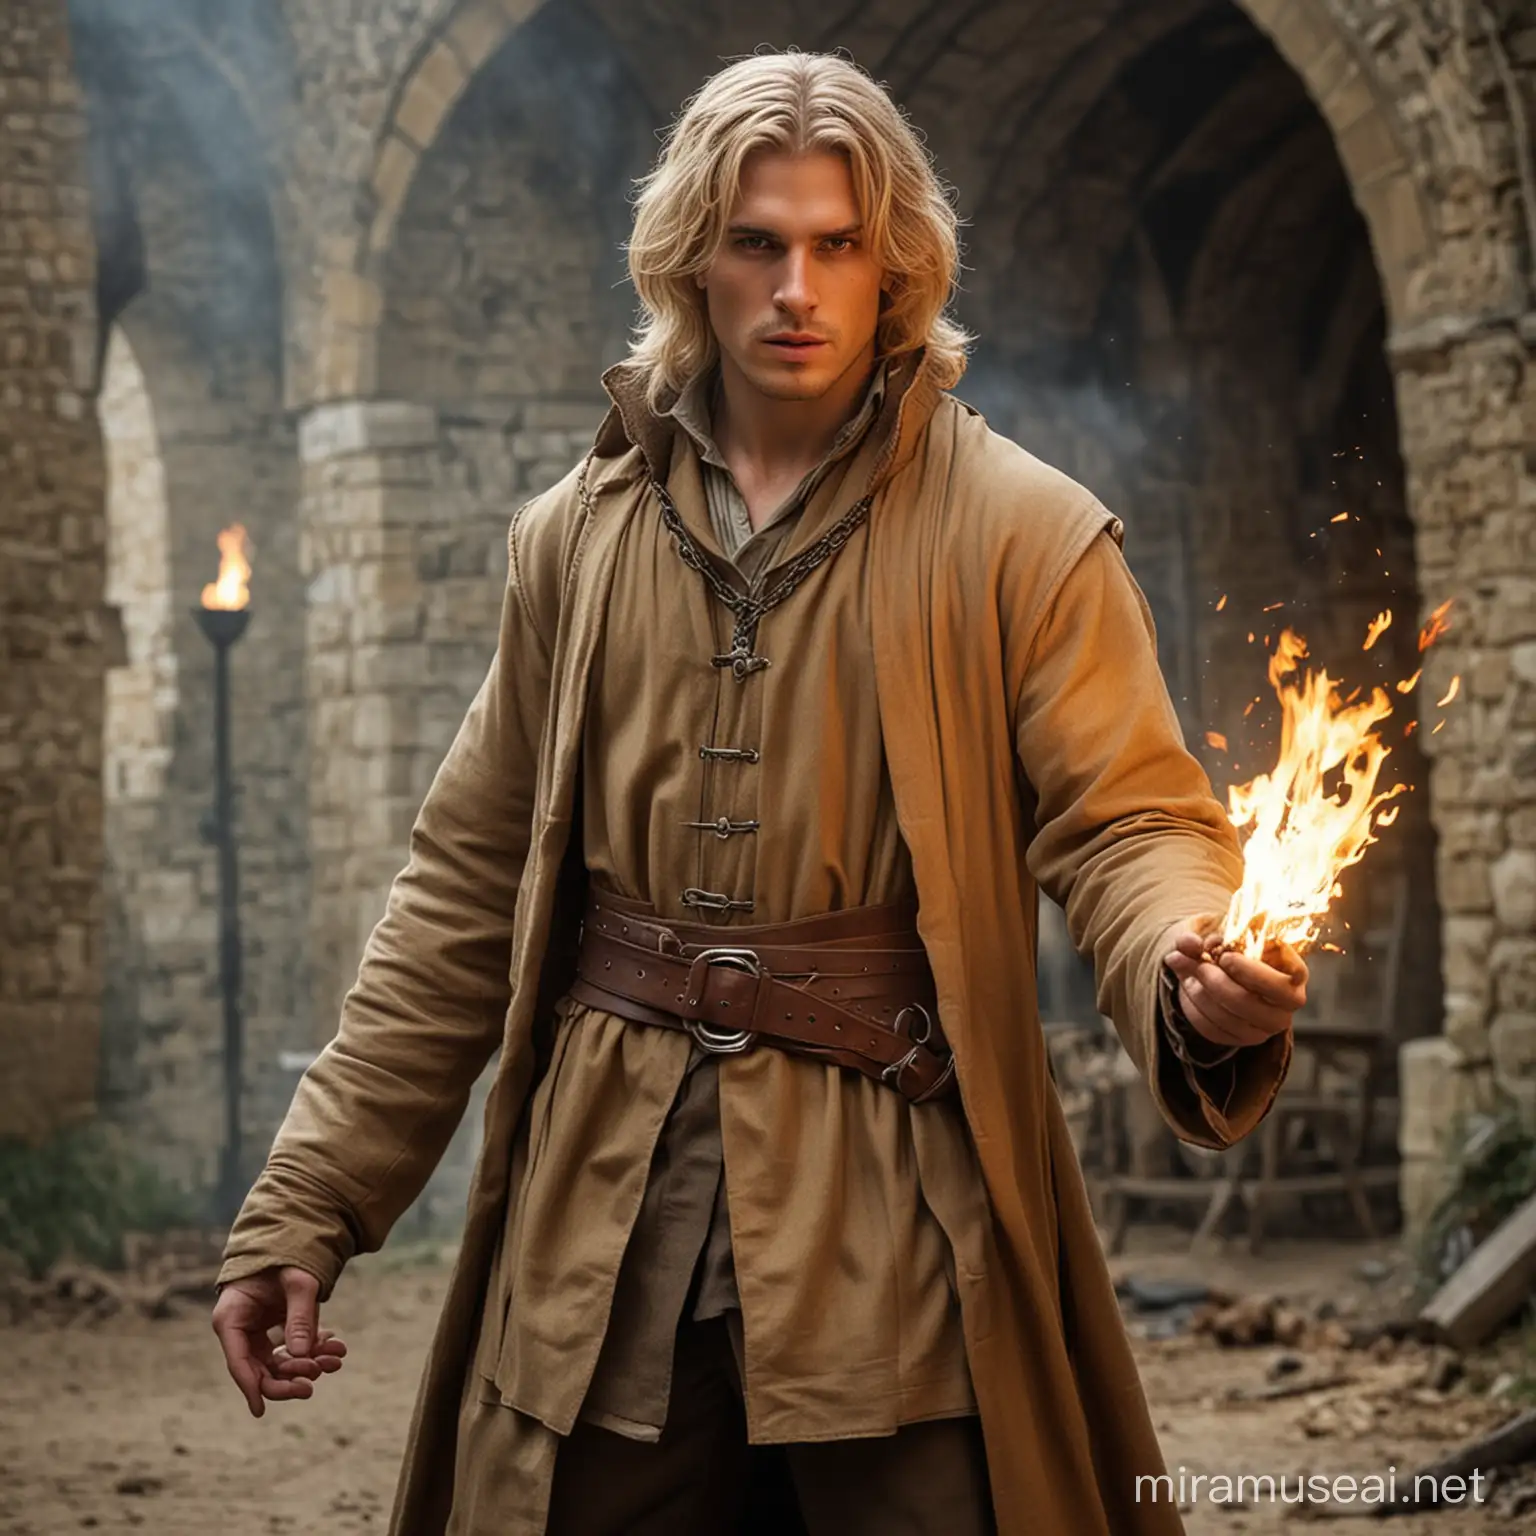 Medieval Fire Sorcerer with Blond Hair and Brown Trenchcoat